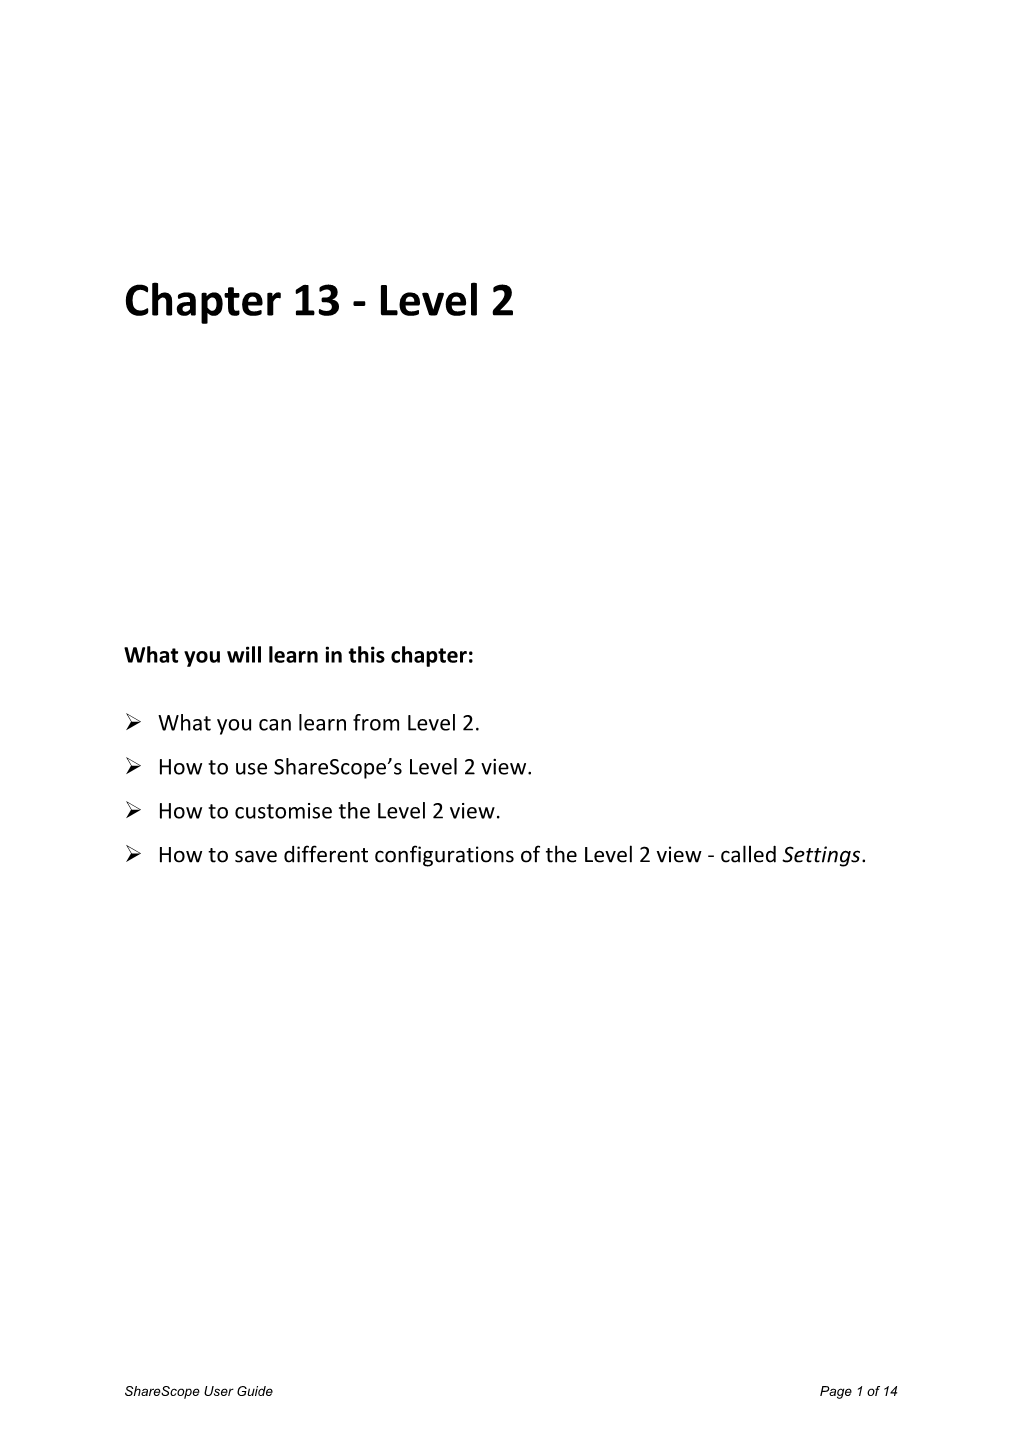 Chapter 13 - Level 2